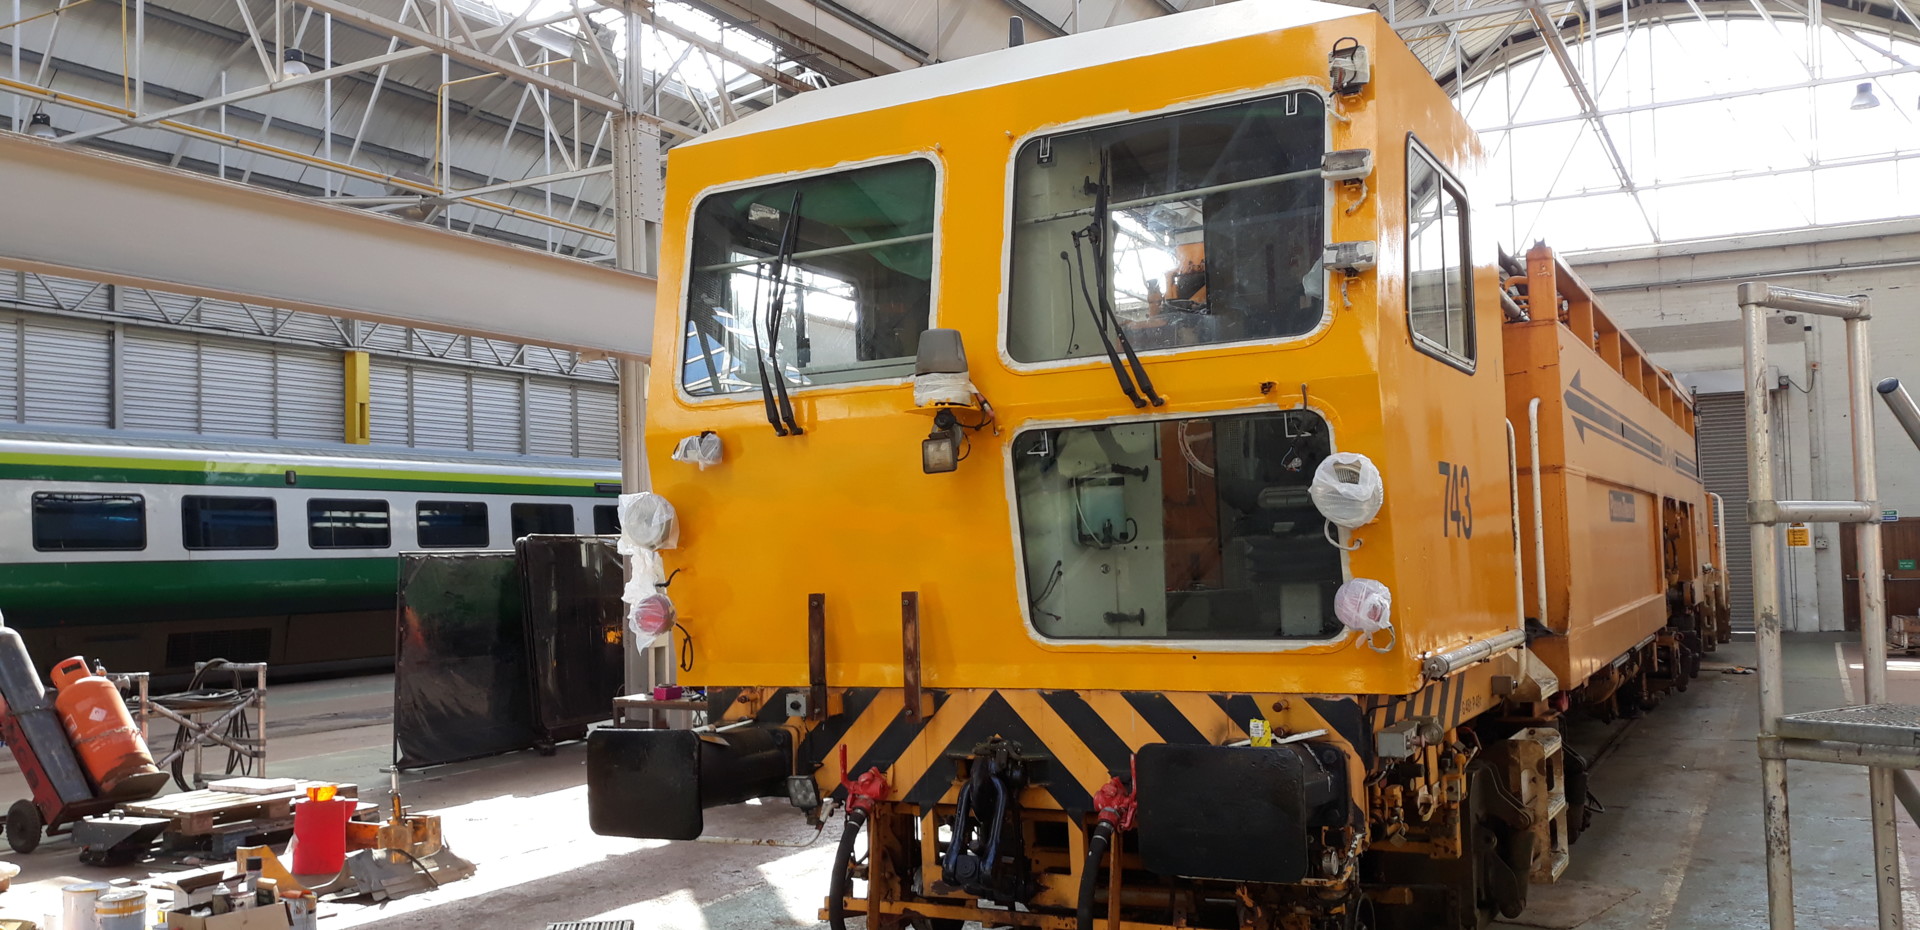 743 cab after painting